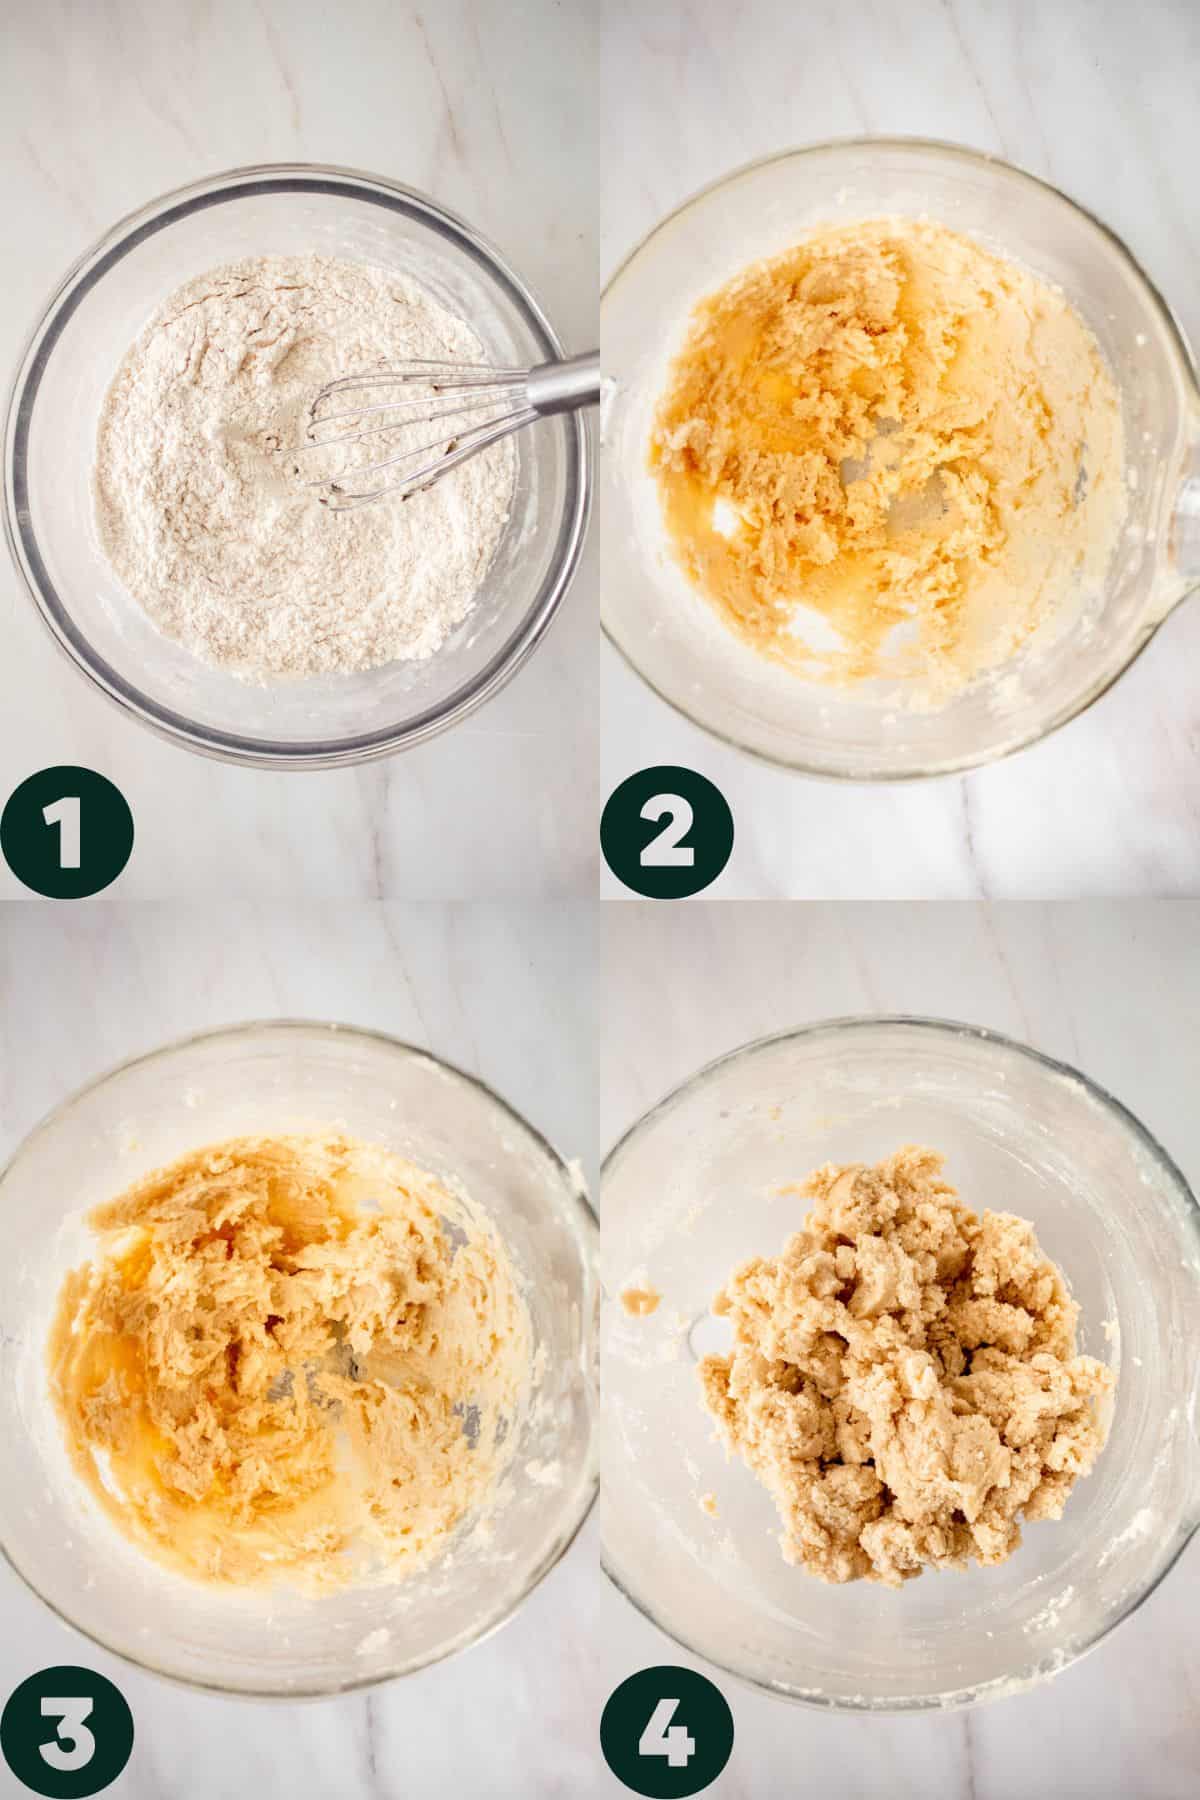 Step by step photos of whisking together the dry ingredients, beating together the butter and sugar, beating in eggs, then beating in the flour mixture